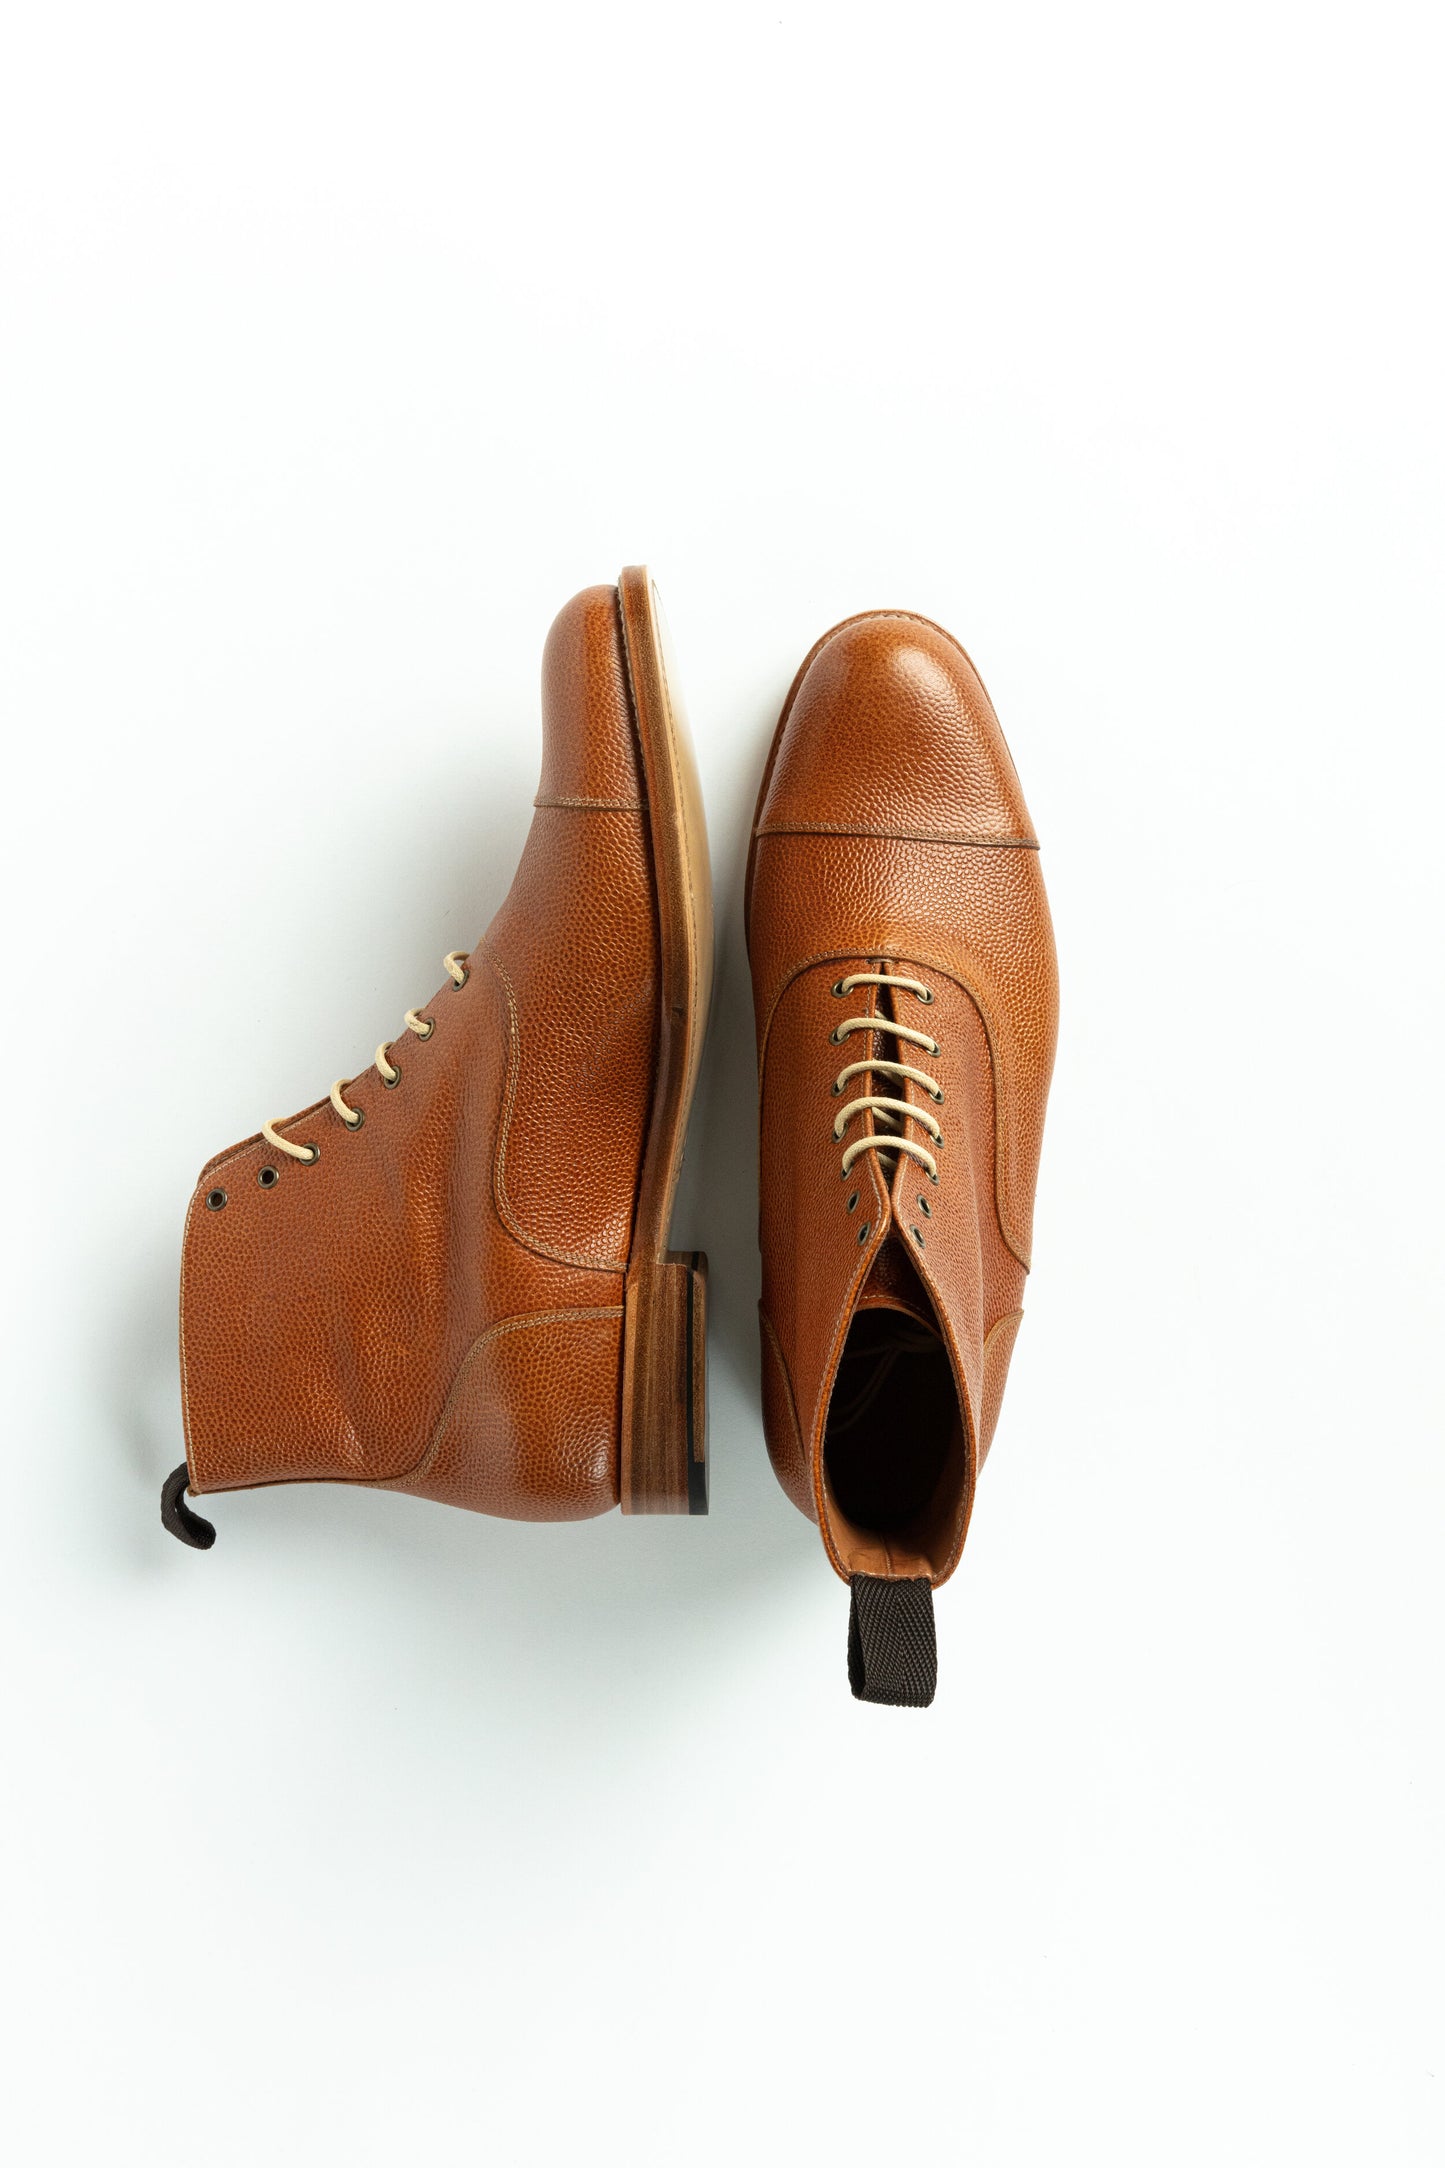 The James Boot in Tan with Matching Belt